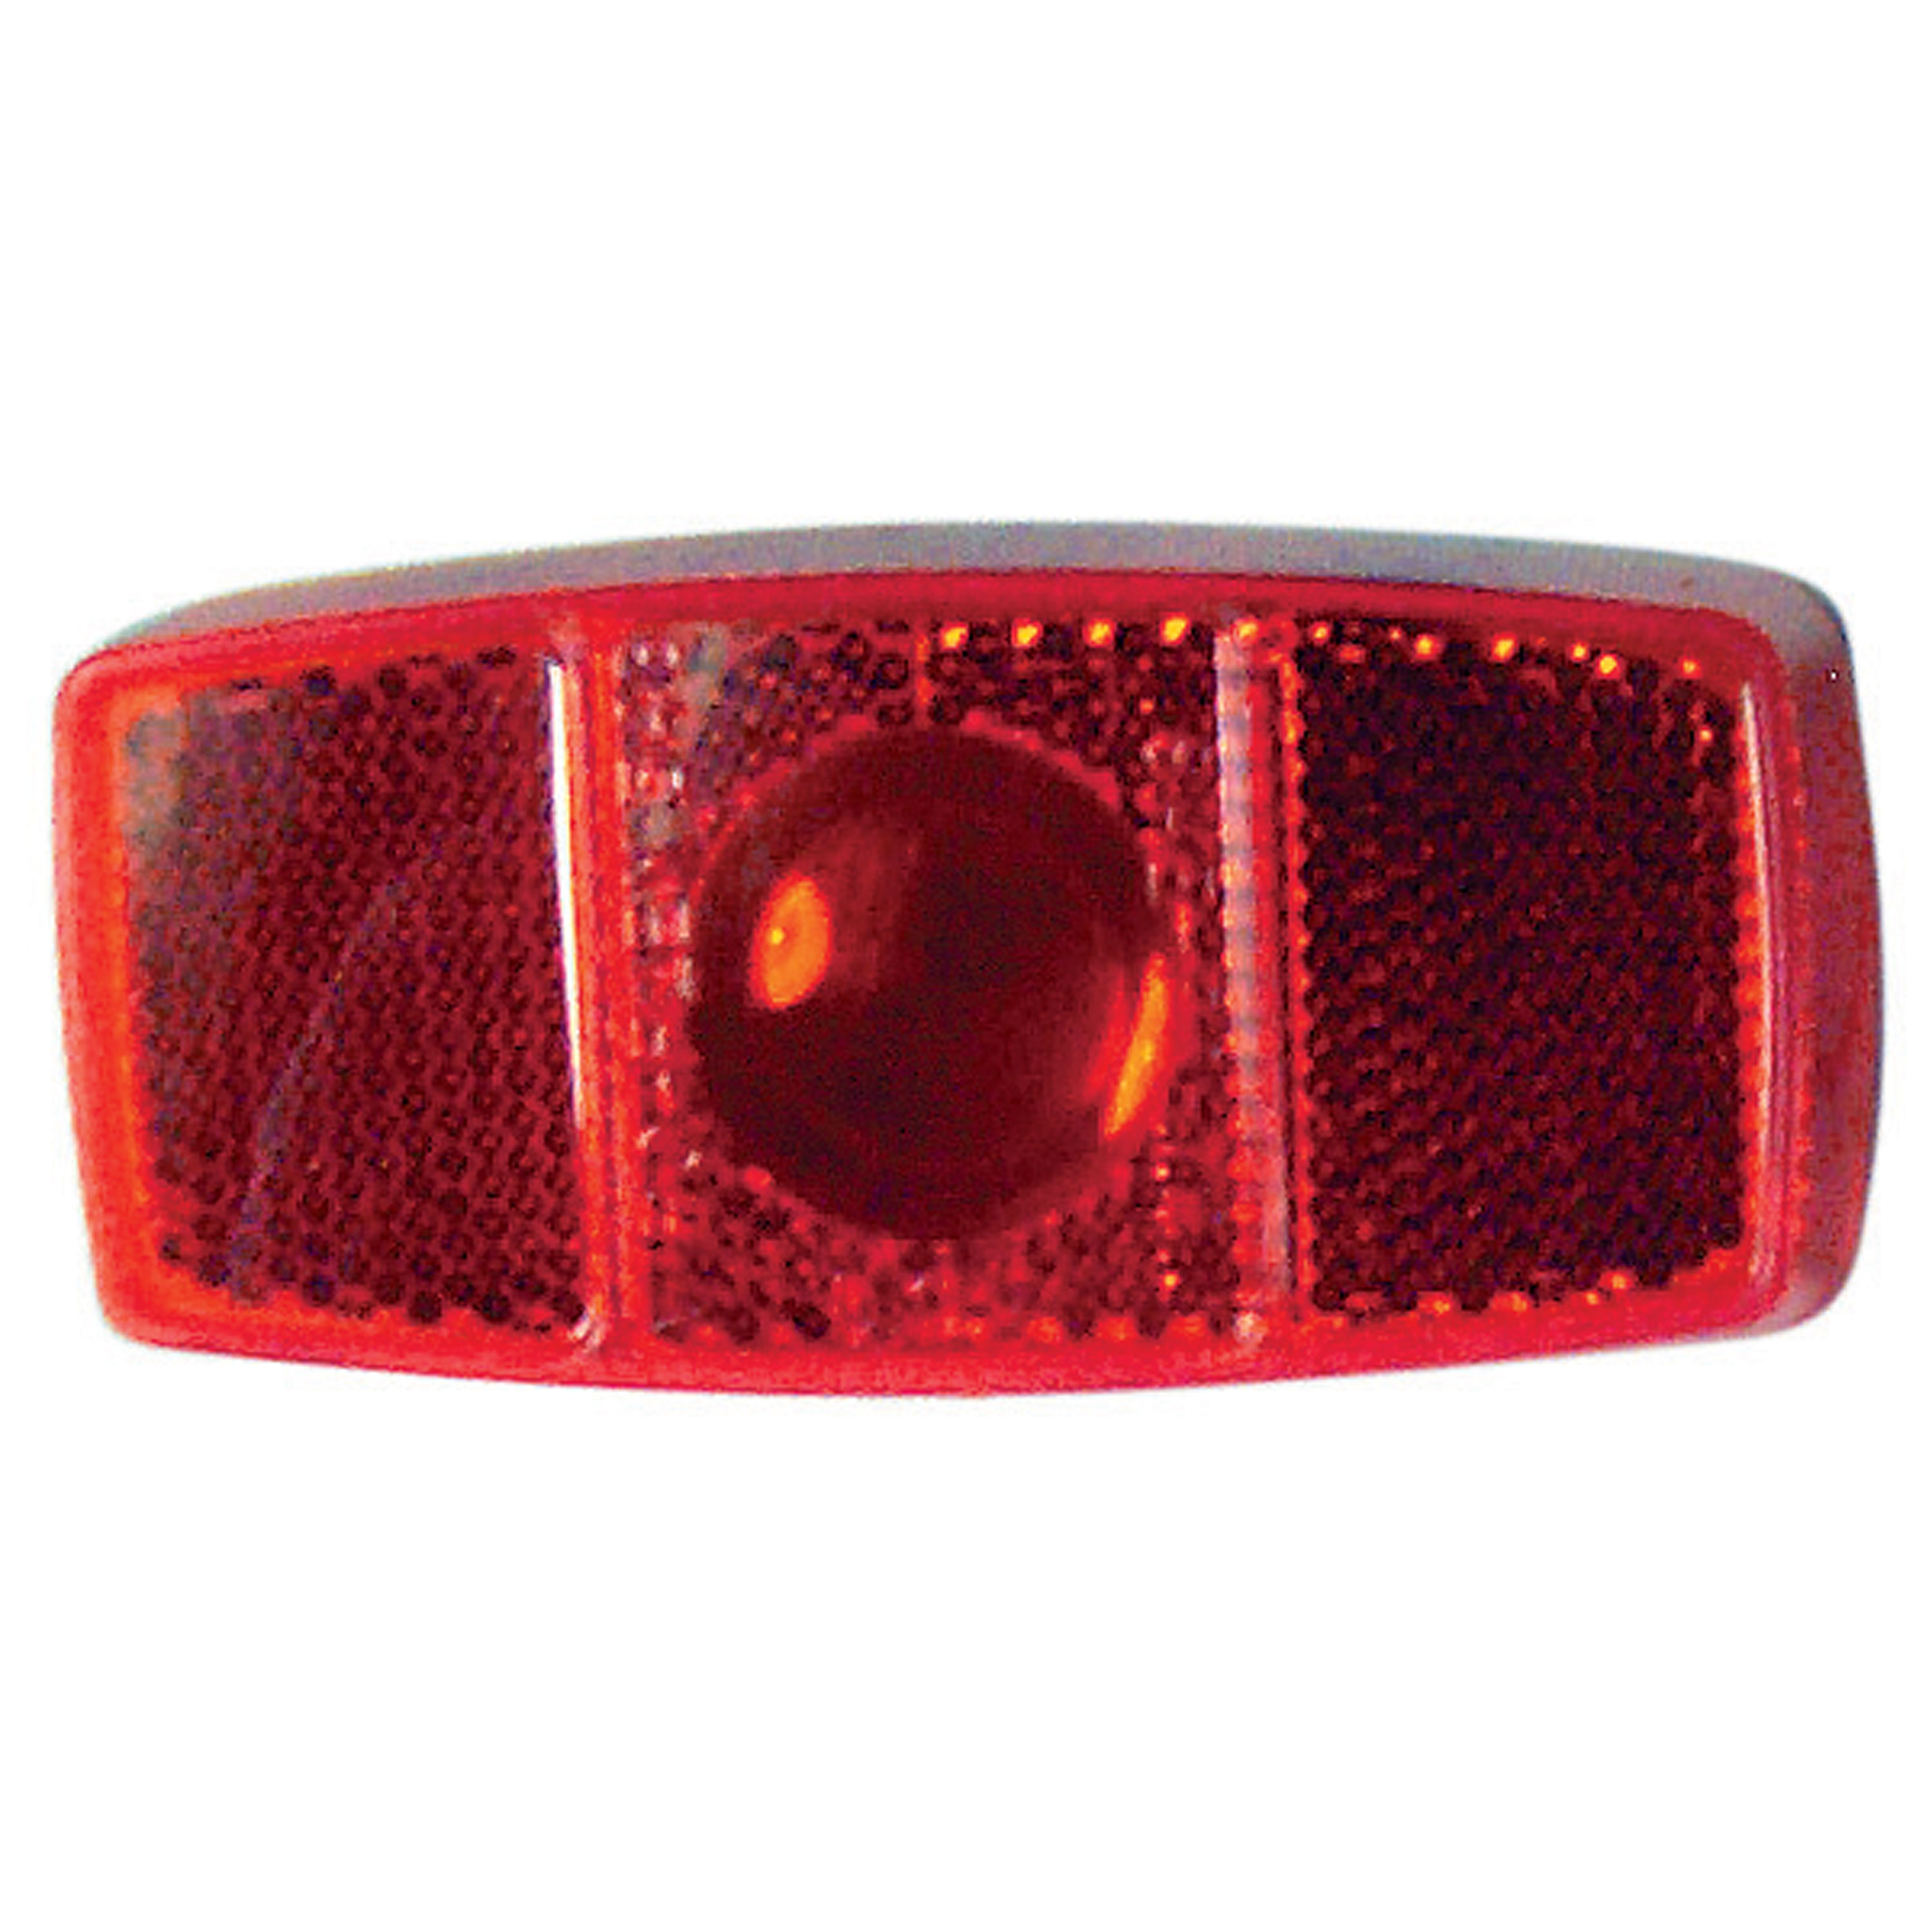 No.349 Clearance Light, Red - 4 X 2 X 1 In.